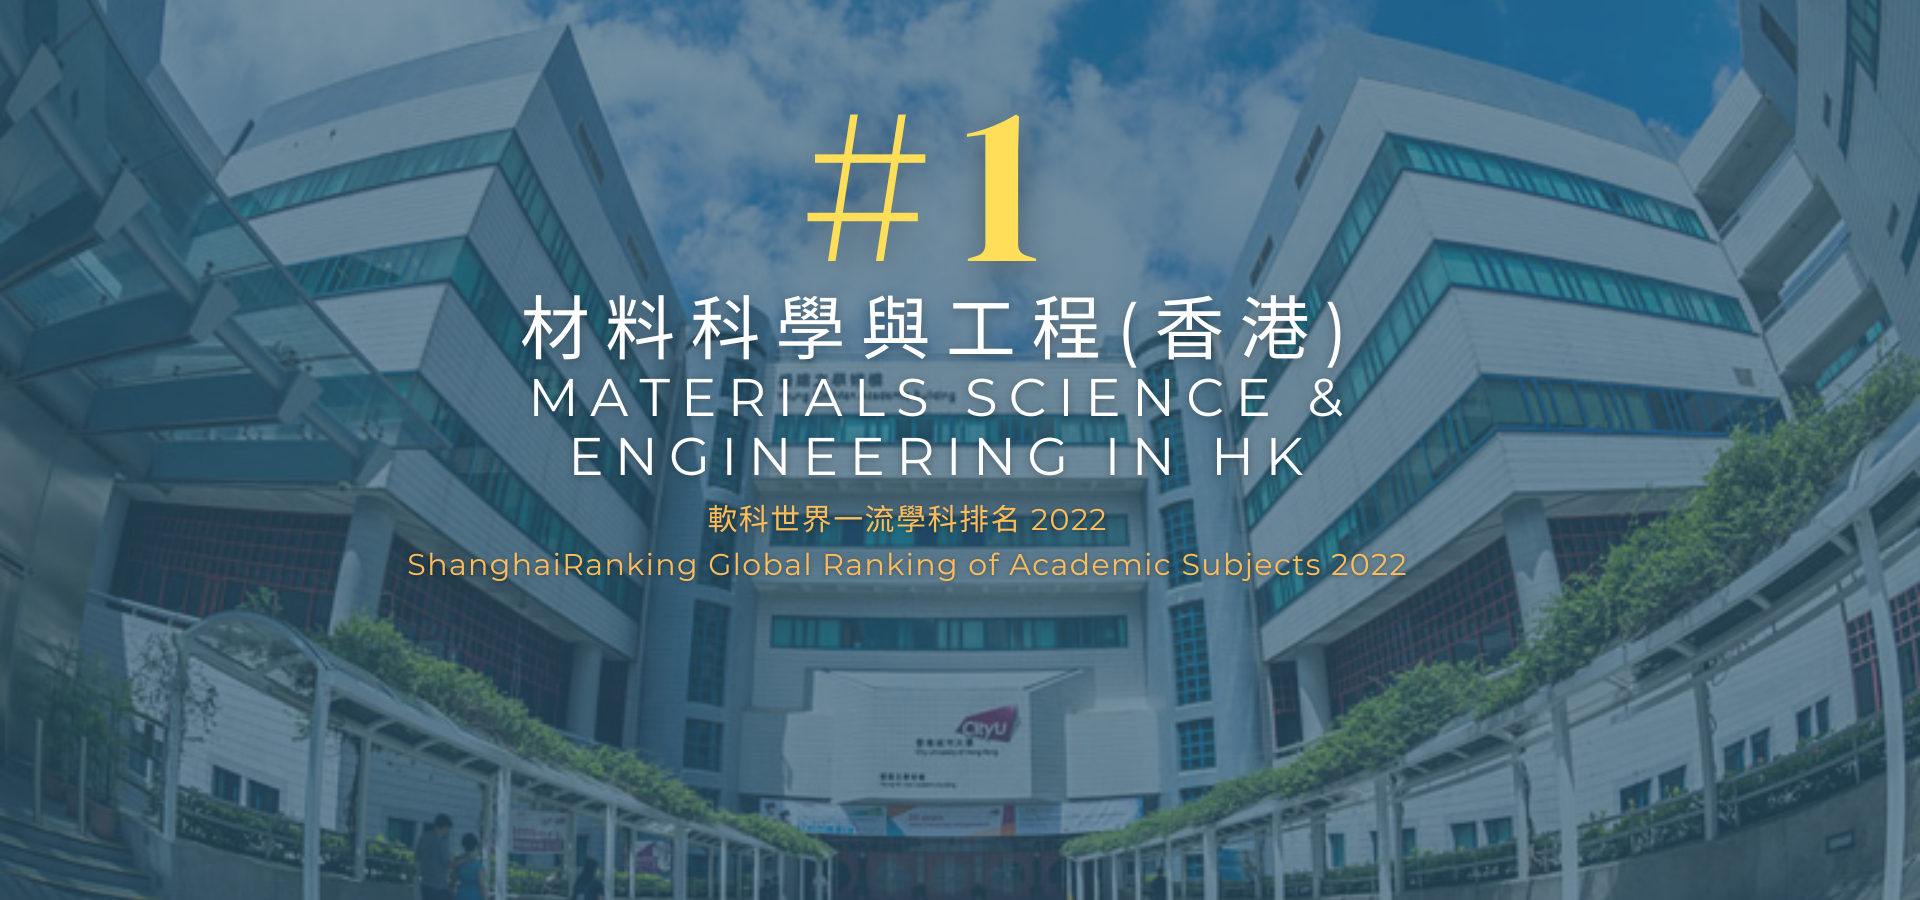 CityU Ranked No. 1 in Hong Kong in the ShanghaiRanking 2022 Global Ranking of Academic Subjects: Materials Sciences & Engineering